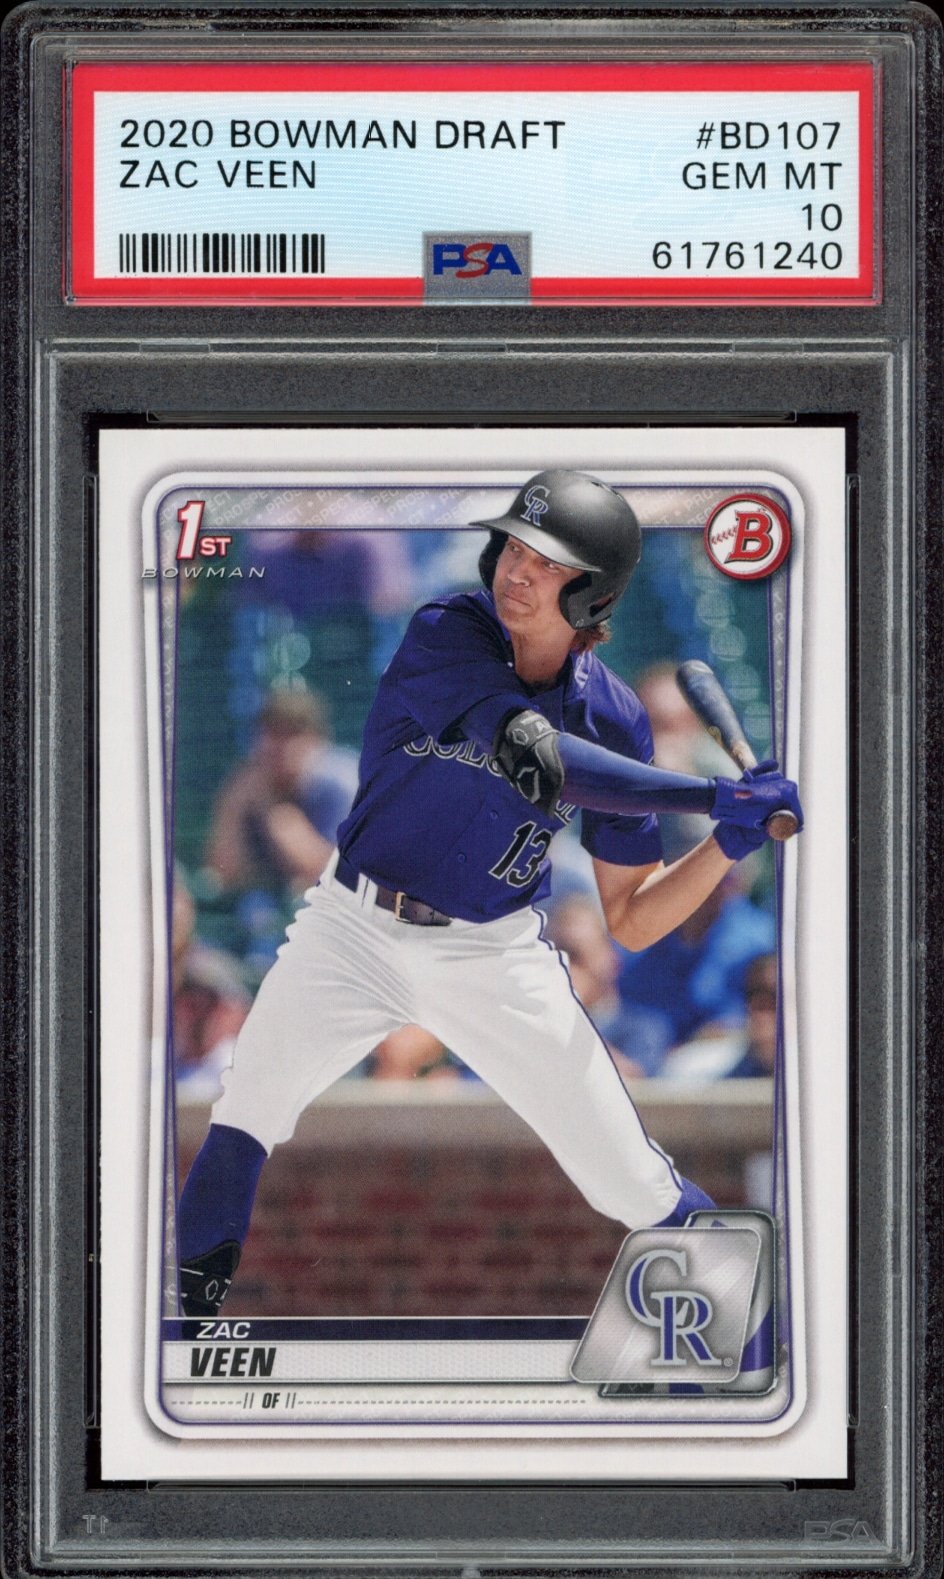 Graded PSA 10 2020 Bowman Draft card of Colorado Rockies player Zac Veen in action.